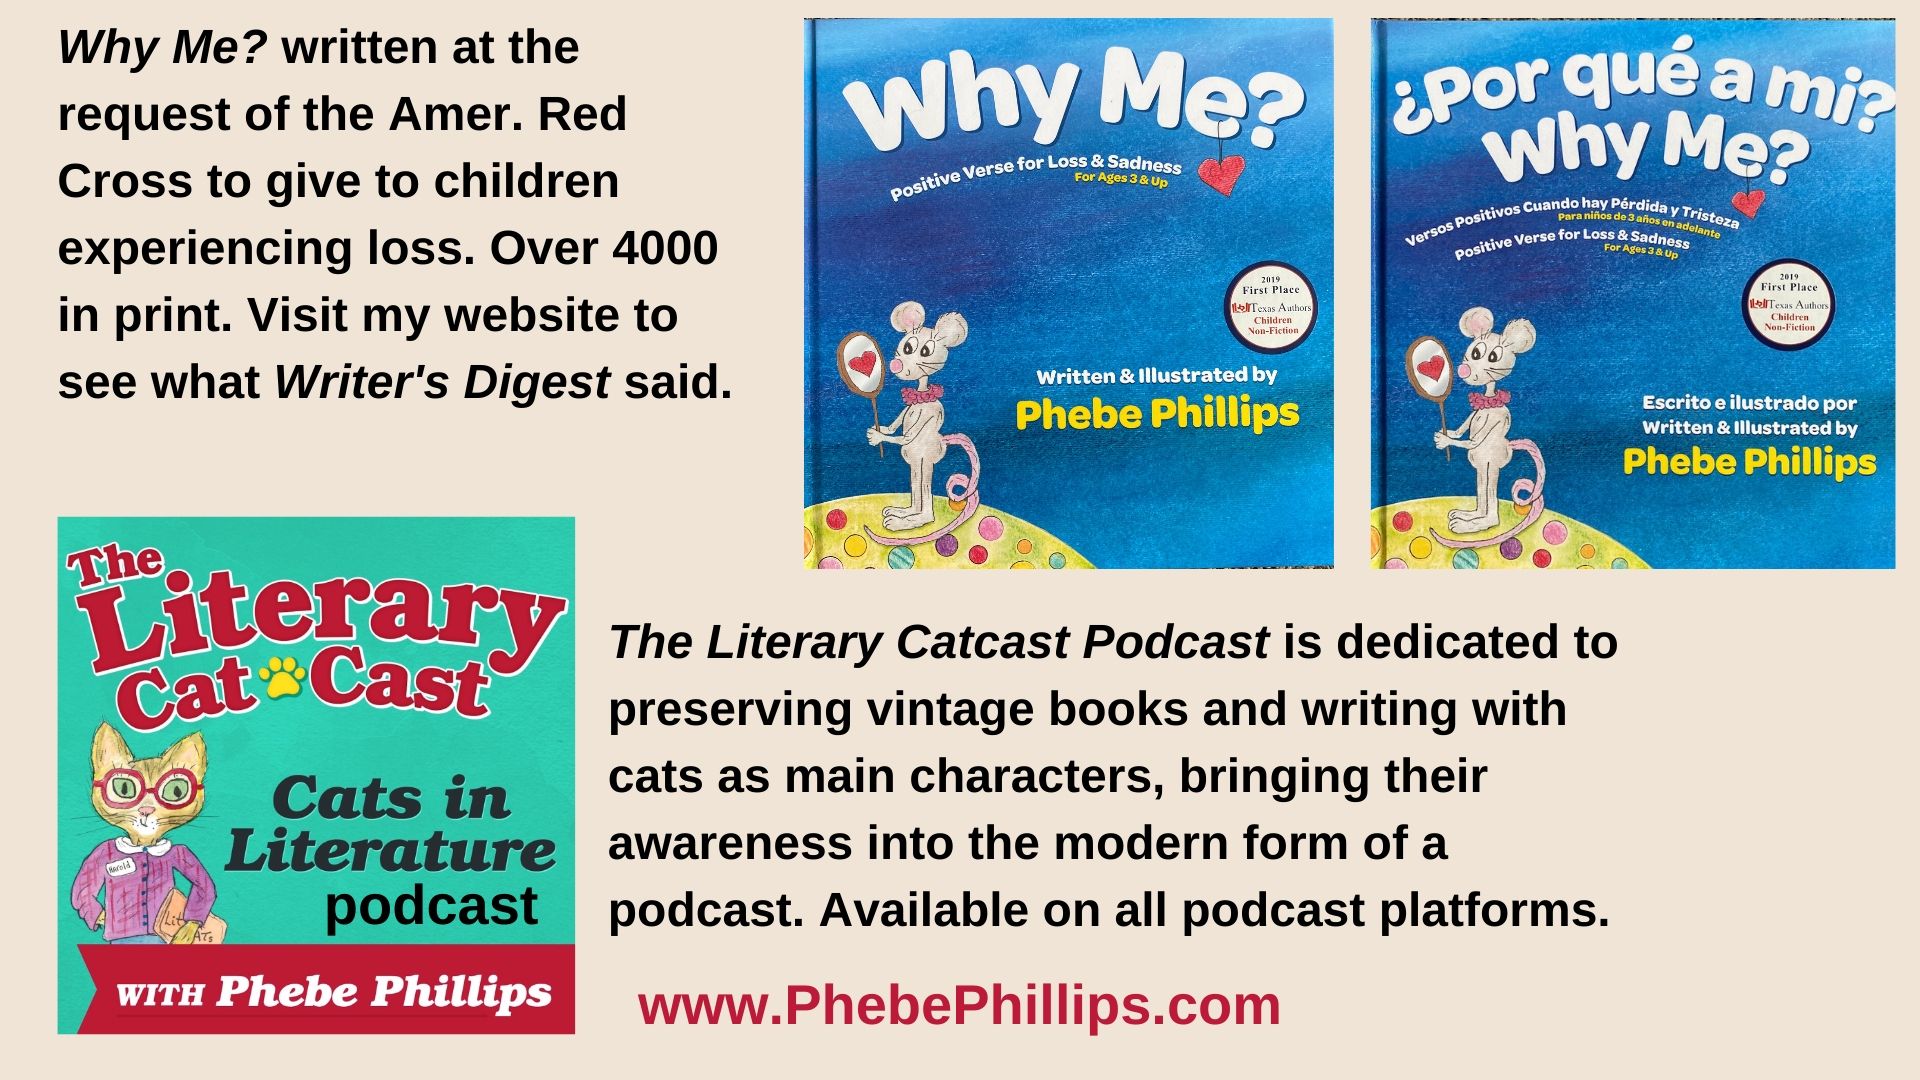 Phebe's Book and Podcast